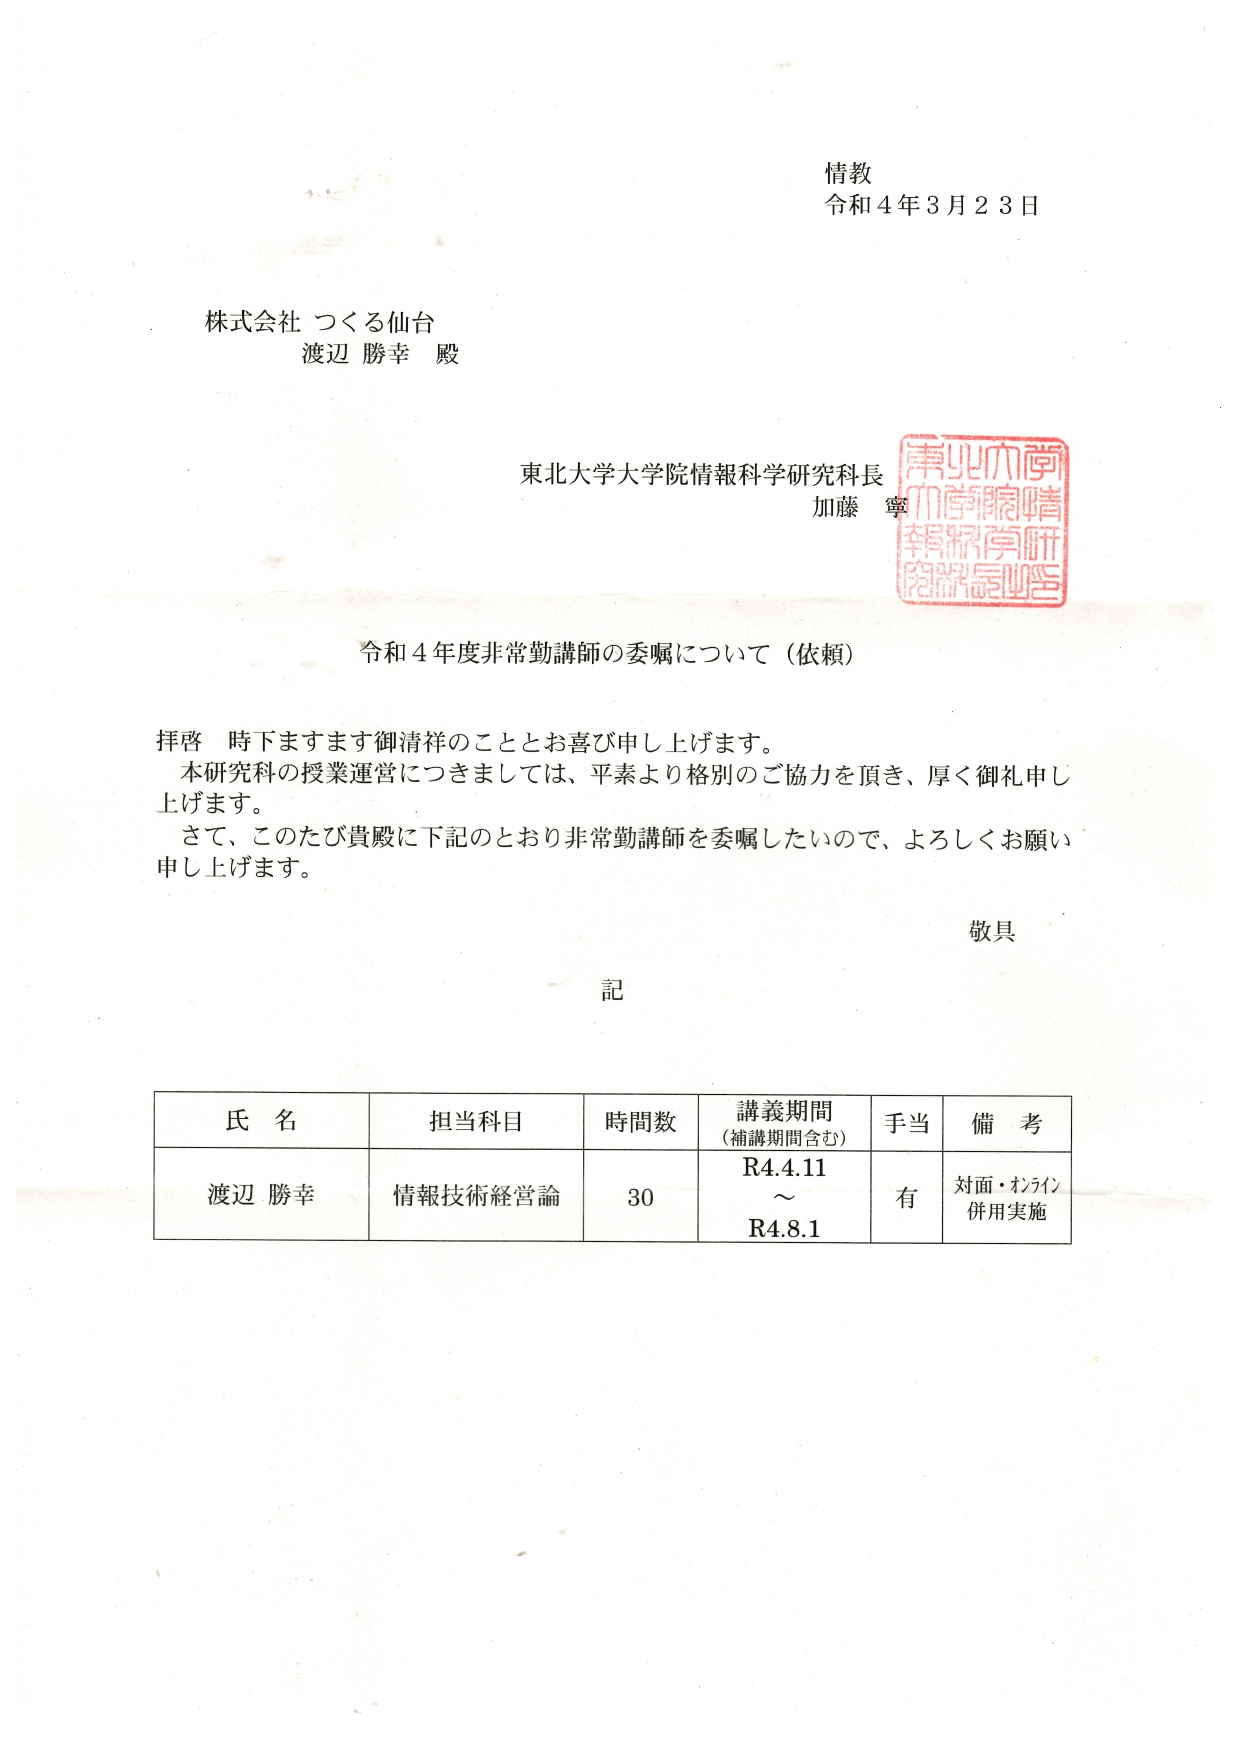 R40326 令和4年度非常勤講師の委嘱について（依頼）令和4年3月23日_page-0001